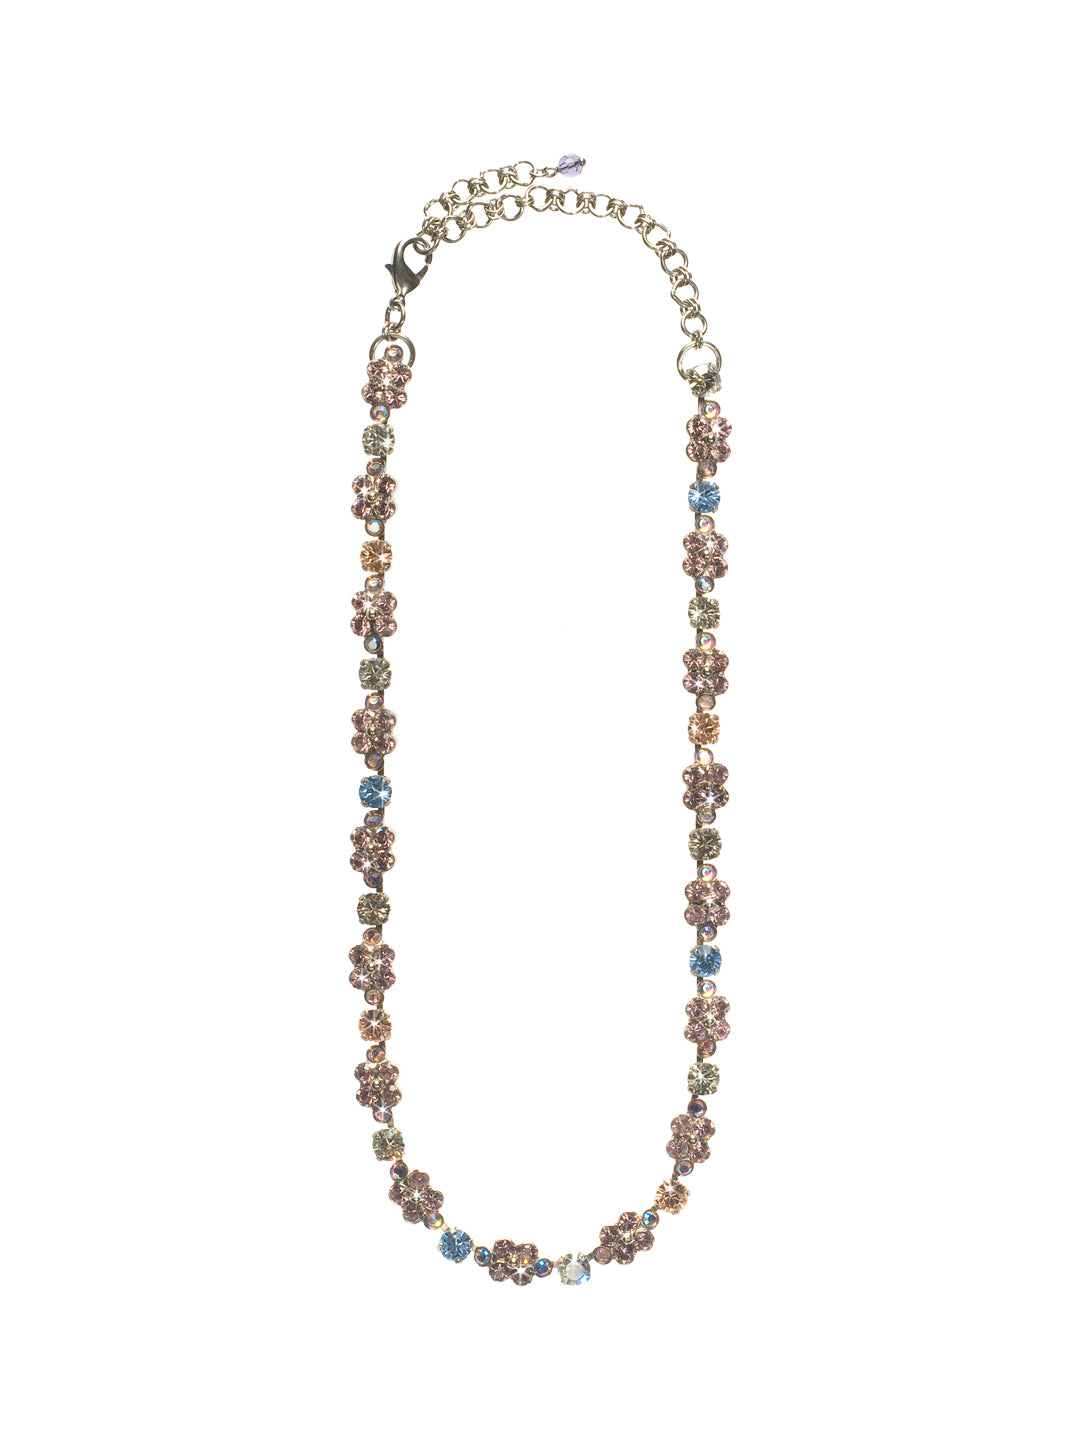 Graceful Glitz Classic Necklace - NCQ6ASDX - <p>An elegant design places a multitude of round crystals together to create a positively precious piece. Floral-like patterns will leave you in a sunny, sparkling haze. From Sorrelli's Dixie collection in our Antique Silver-tone finish.</p>